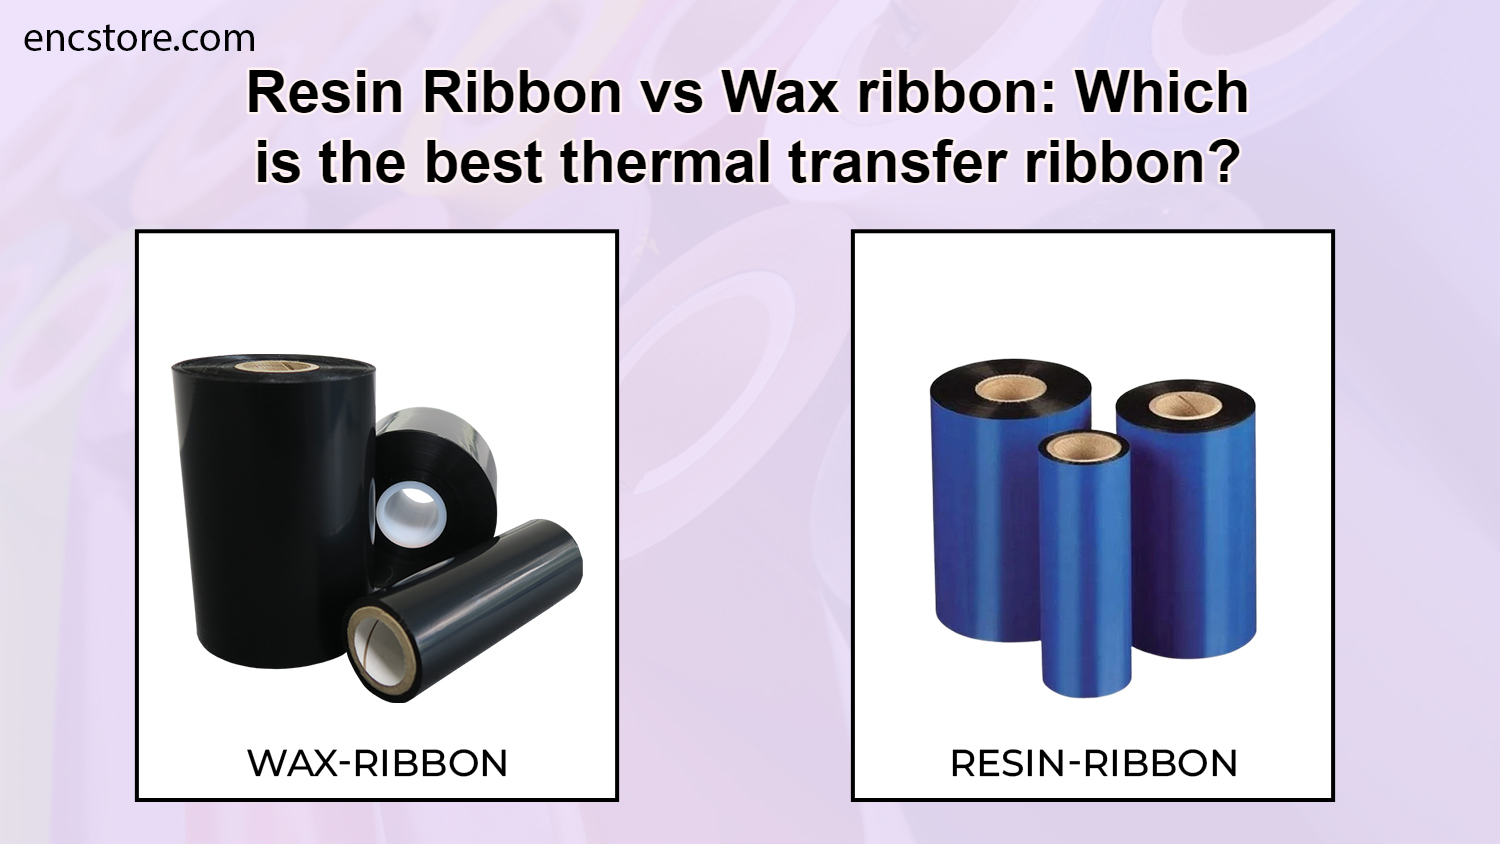 Resin Ribbon vs Wax ribbon: Which is the best thermal transfer ribbon?